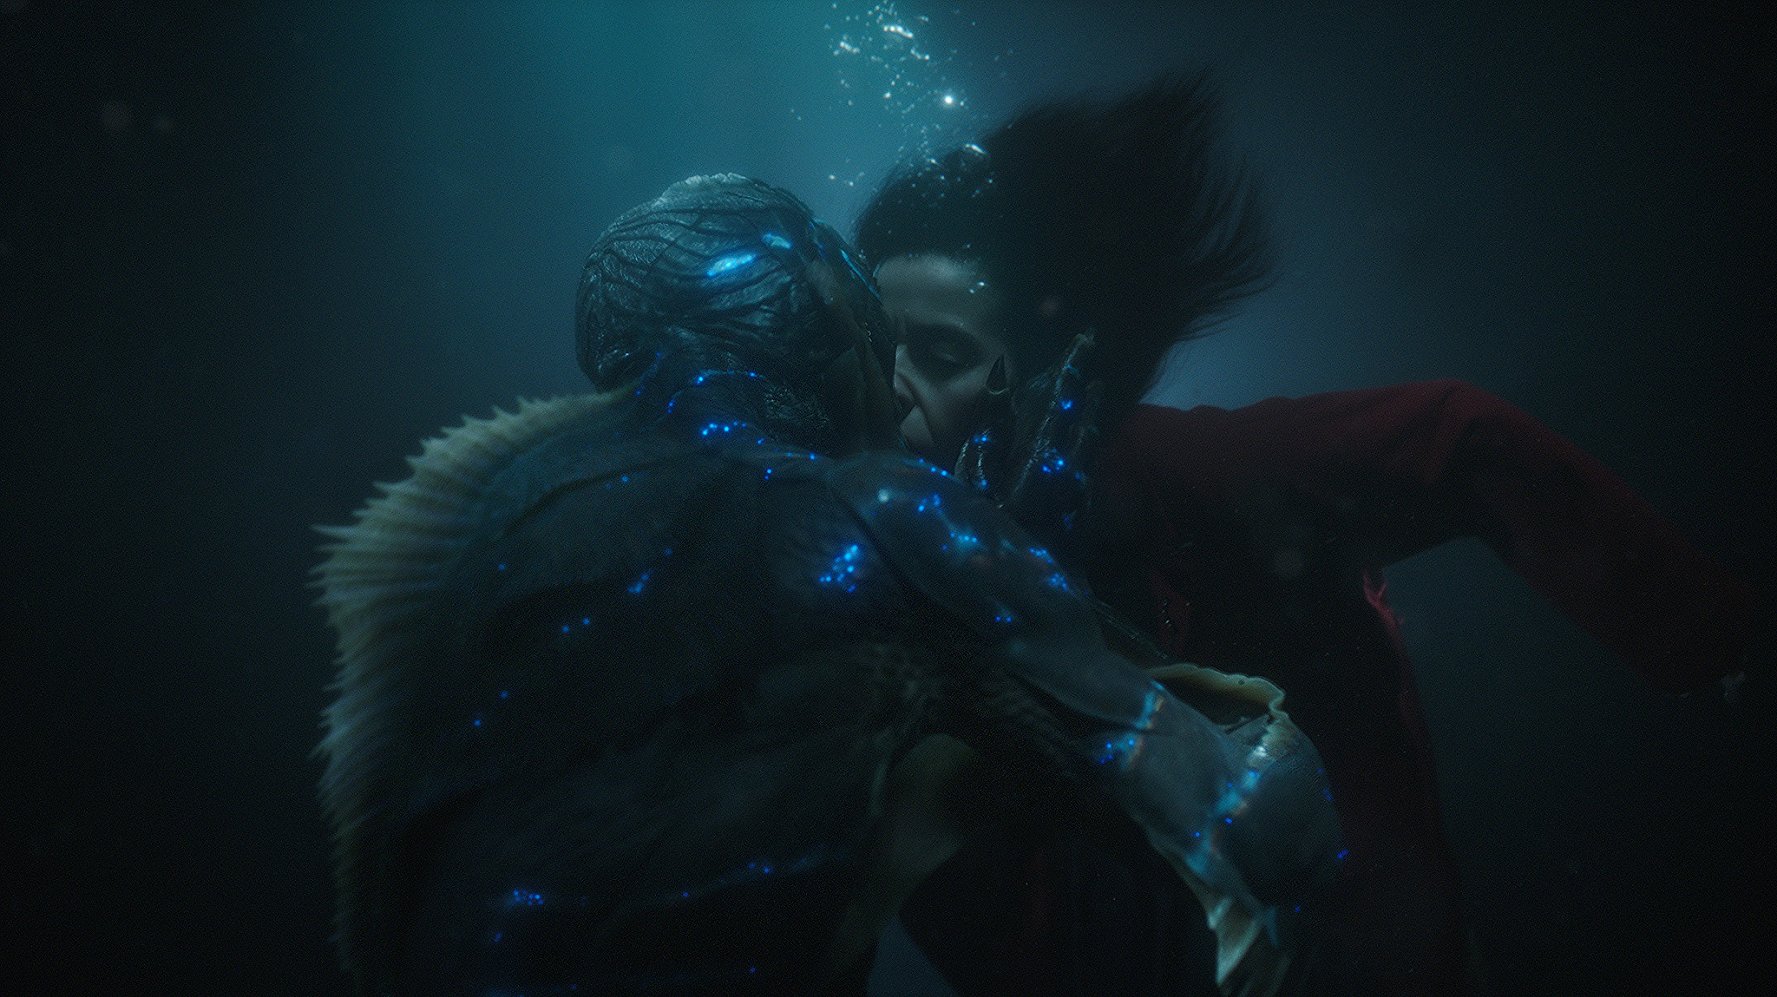 Movie Multiverse: The Shape of Water